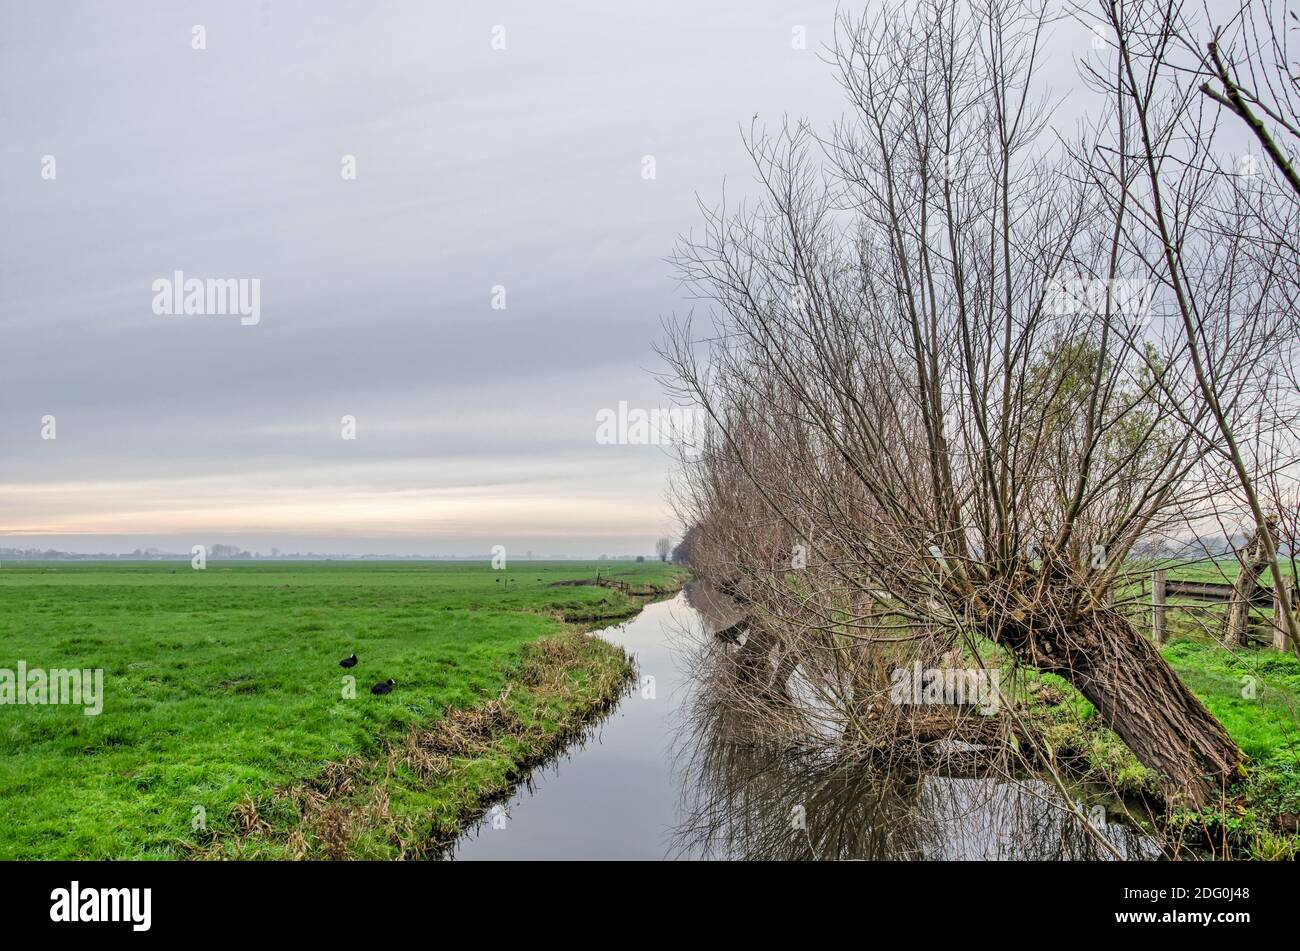 Pollard willows between a polder ditch and the Tiendweg hiking trail between Haastrecht and Oudewater in the Netherlands on a cloudy winter day Stock Photo